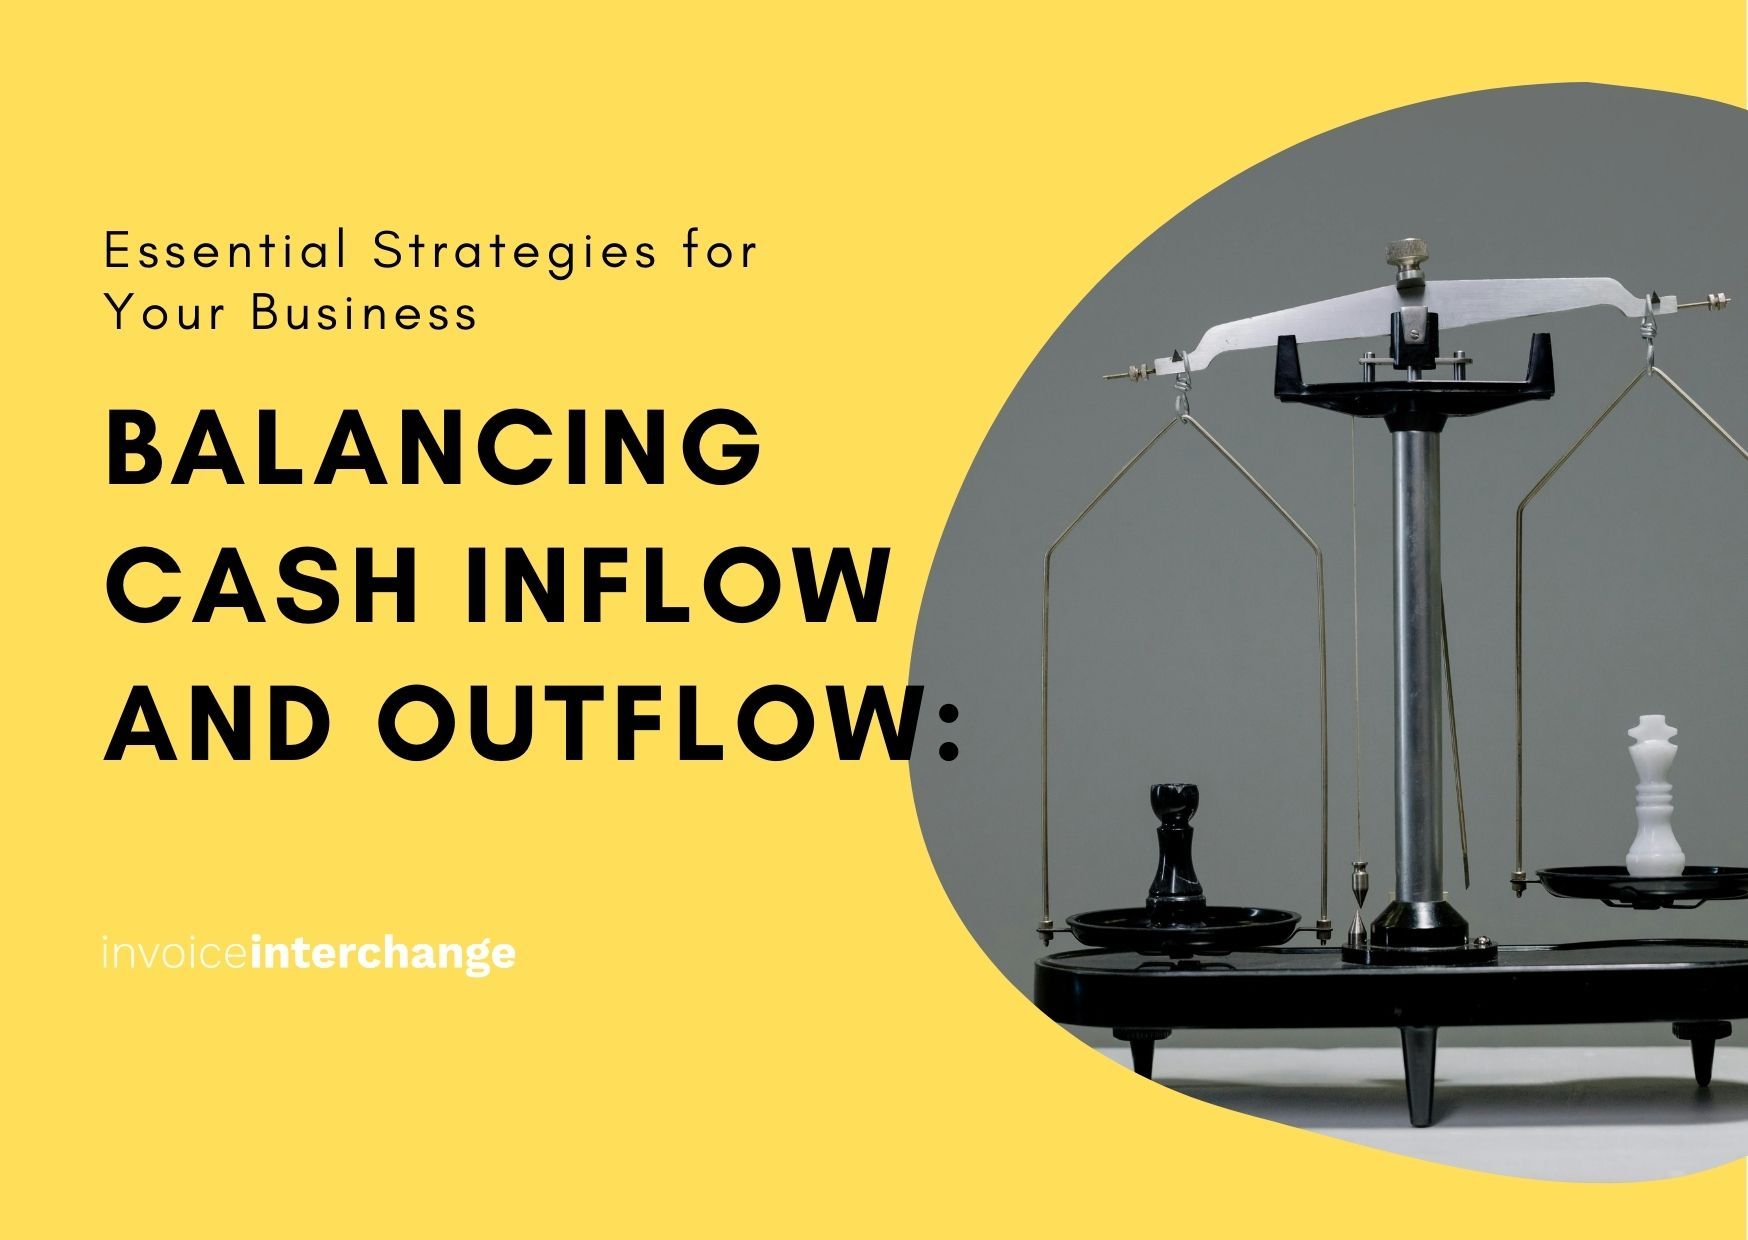 Balancing Cash Inflow and Outflow: Essential Strategies for Your Business